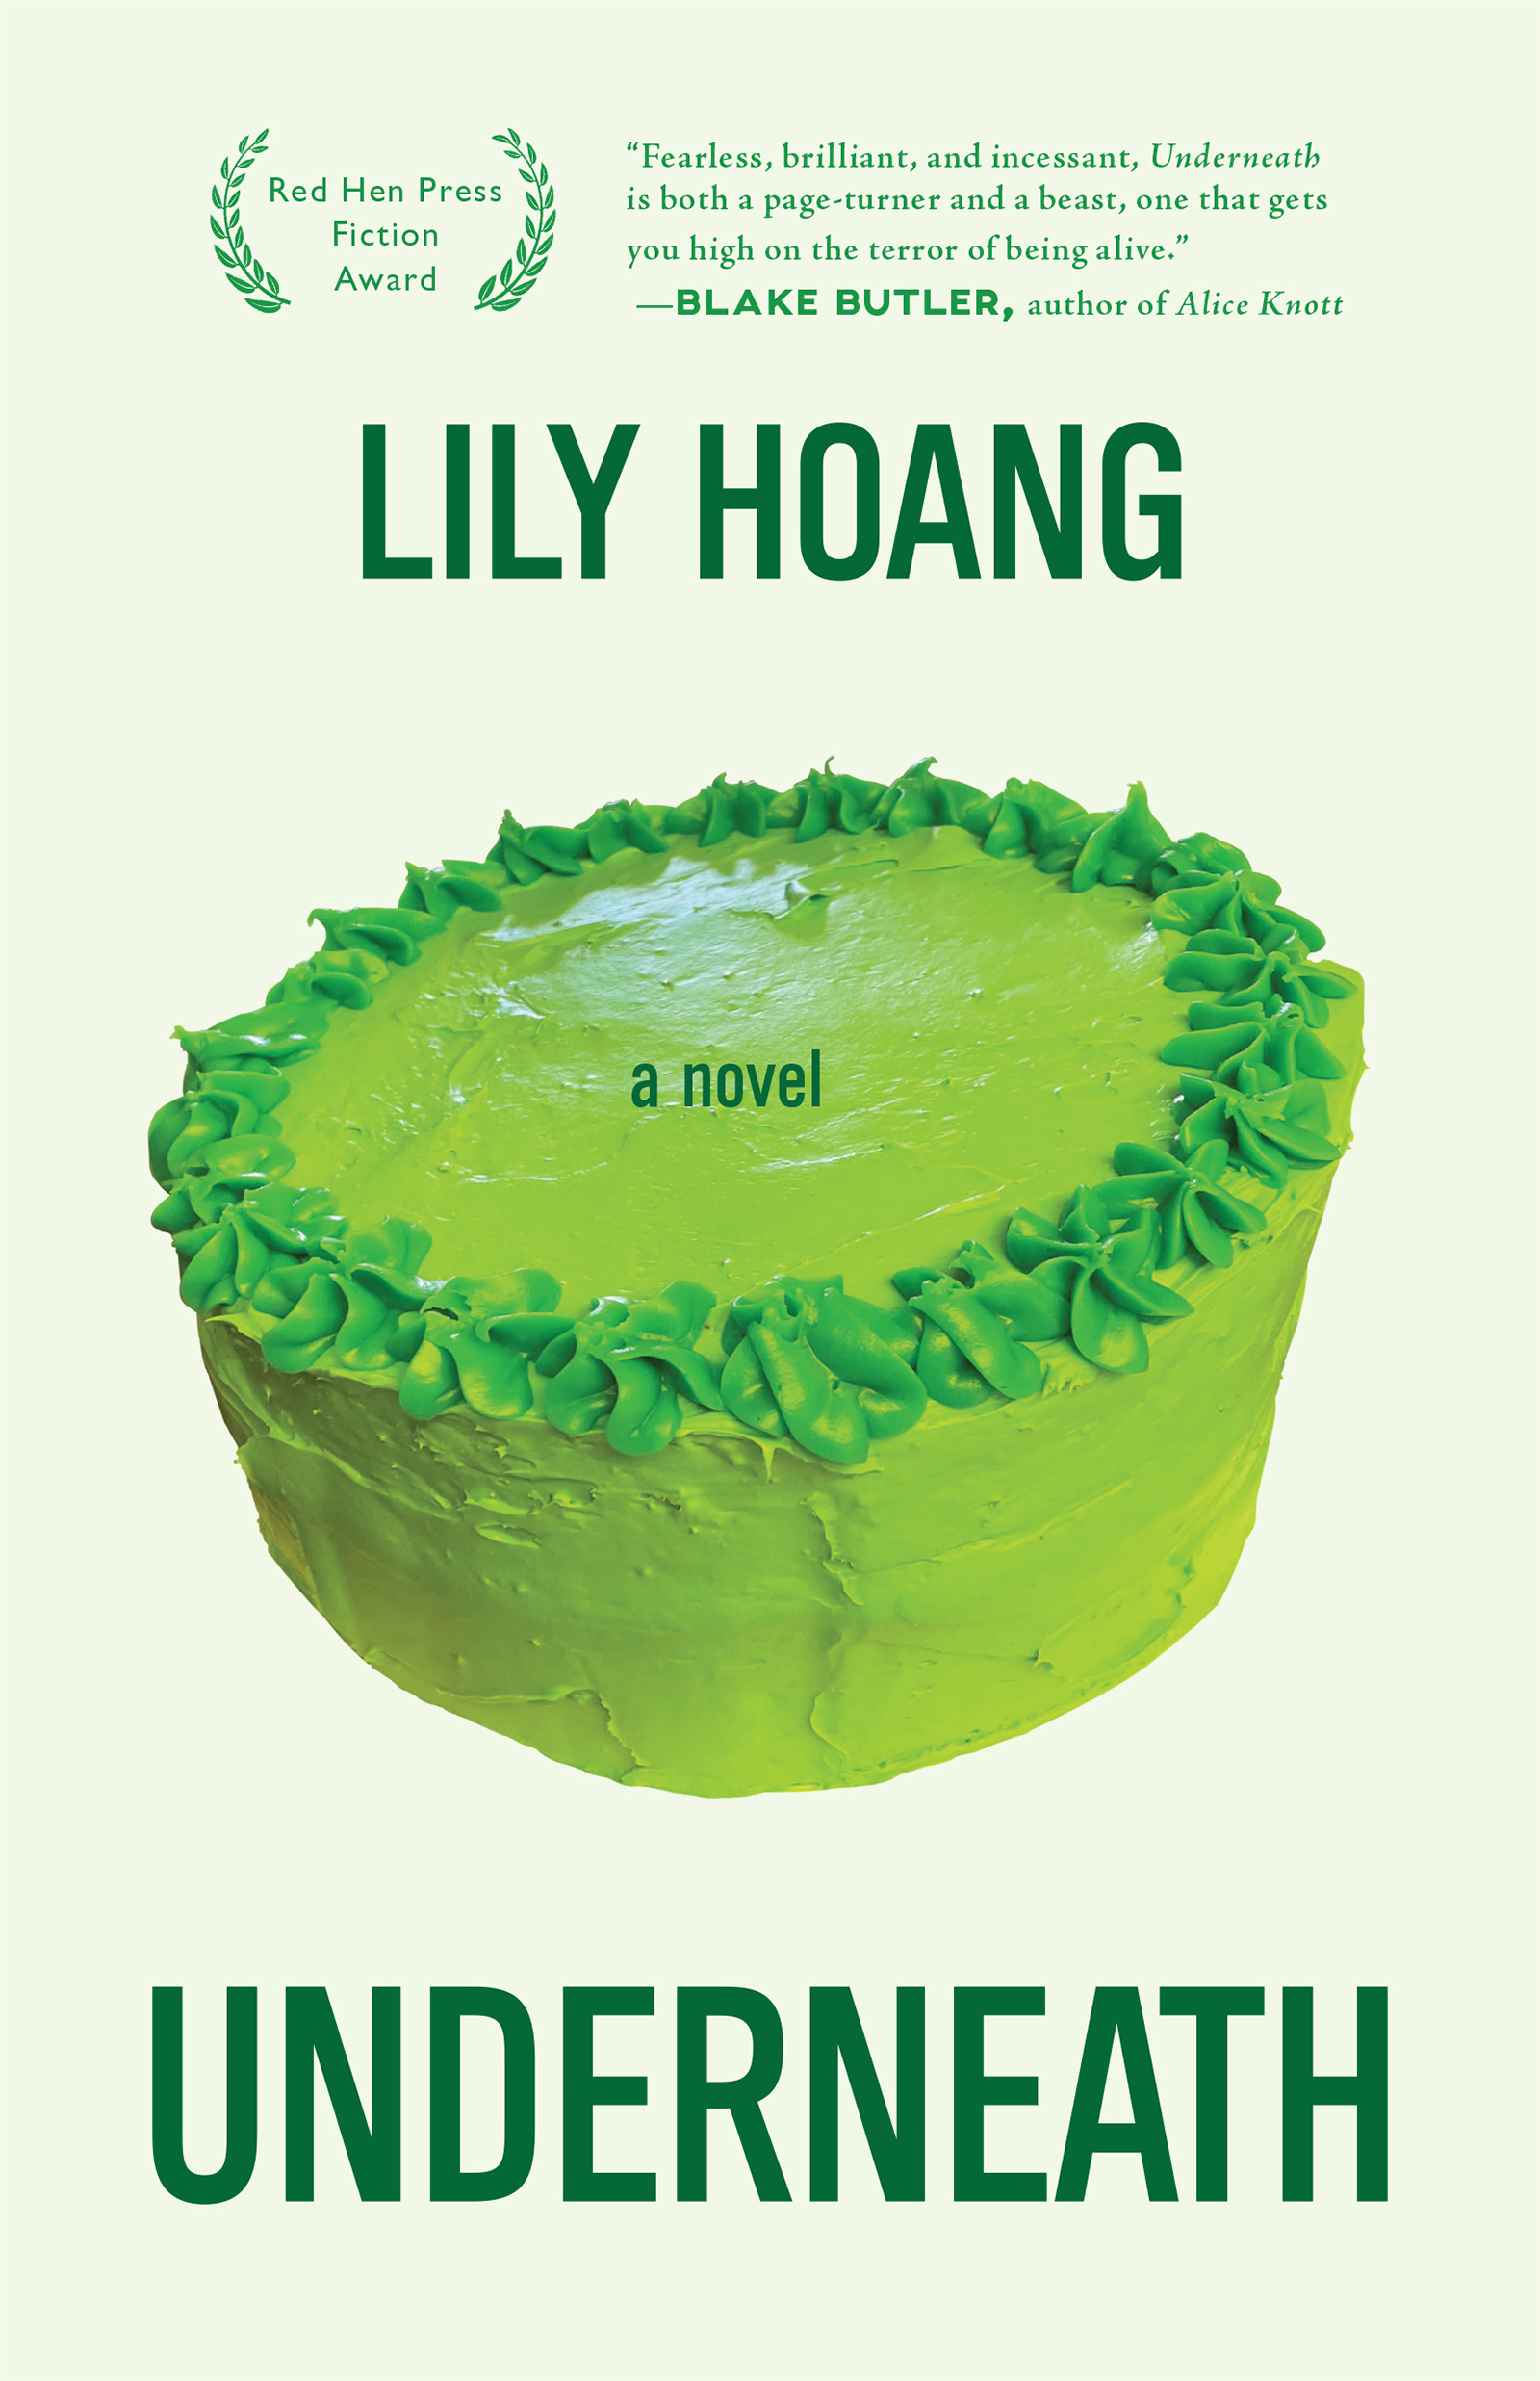 A lime green background that has dark green script which reads Underneath a novel by Lily Hoang with a green cake at the center.